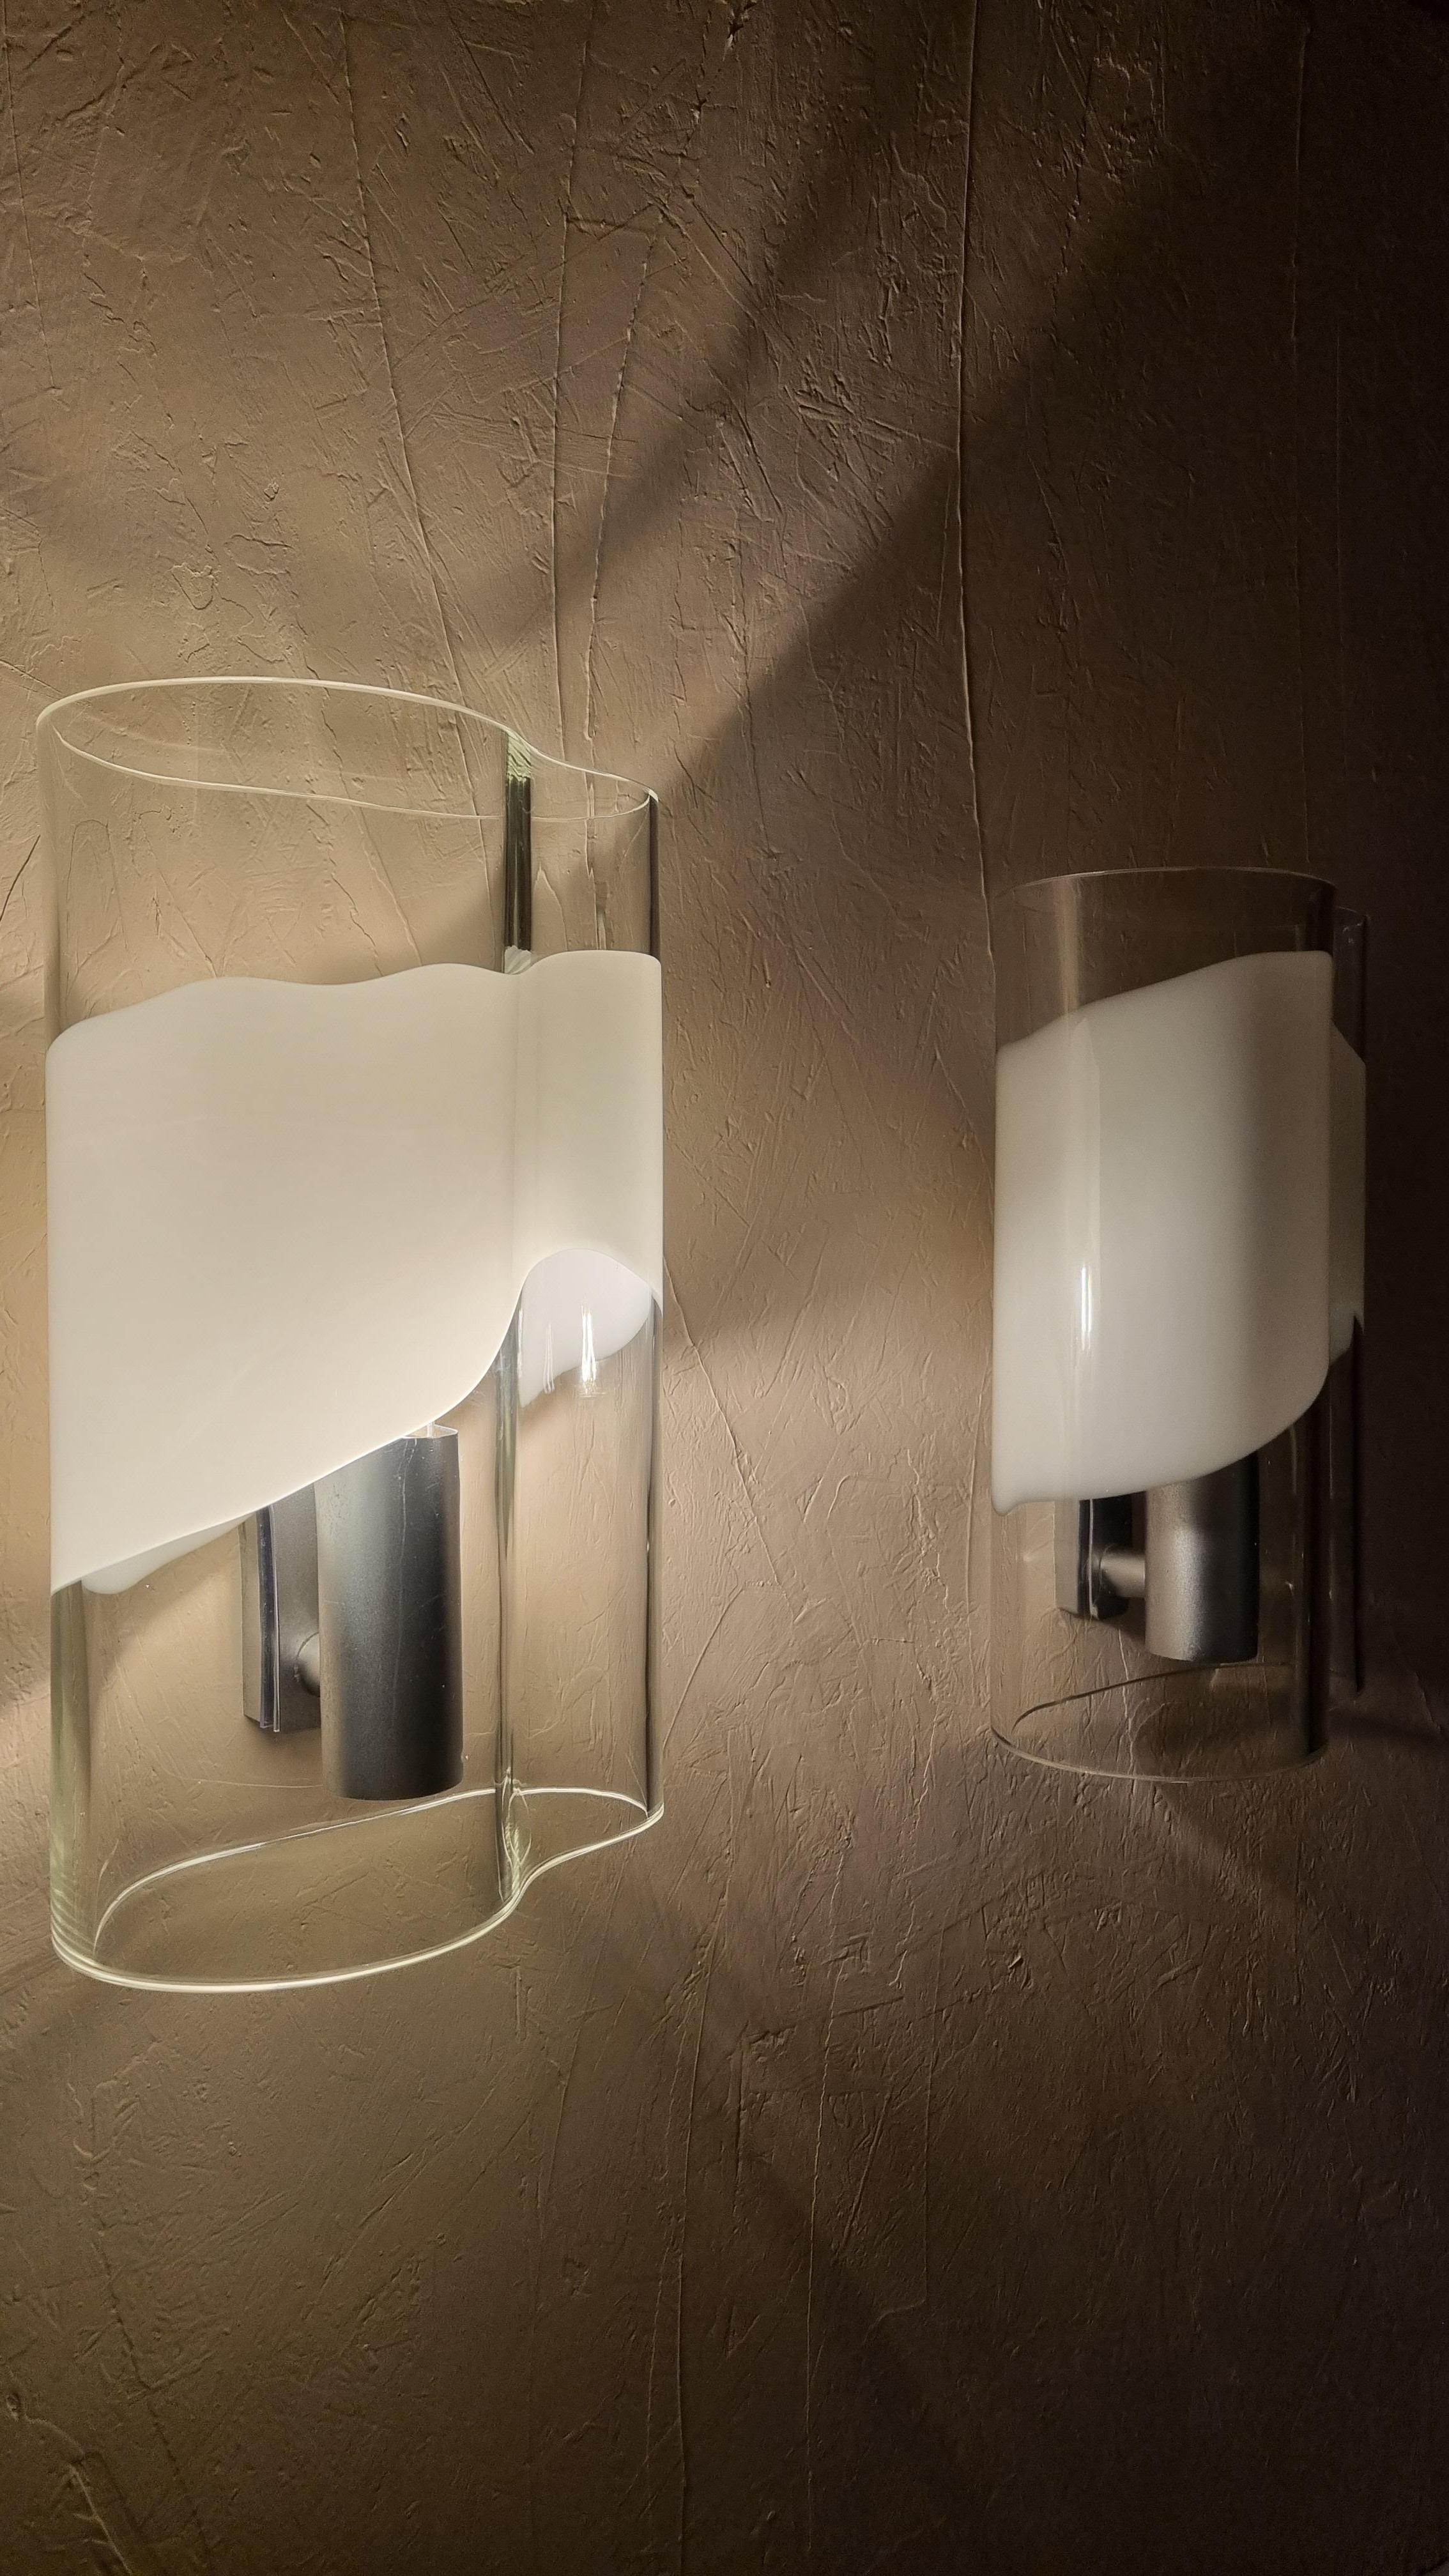 Murano glass and aluminium wall sconces designed by Carlo Nason for Mazzega, 1970s.
The lamps are in excellent condition, electrical system overhauled, fully functional.